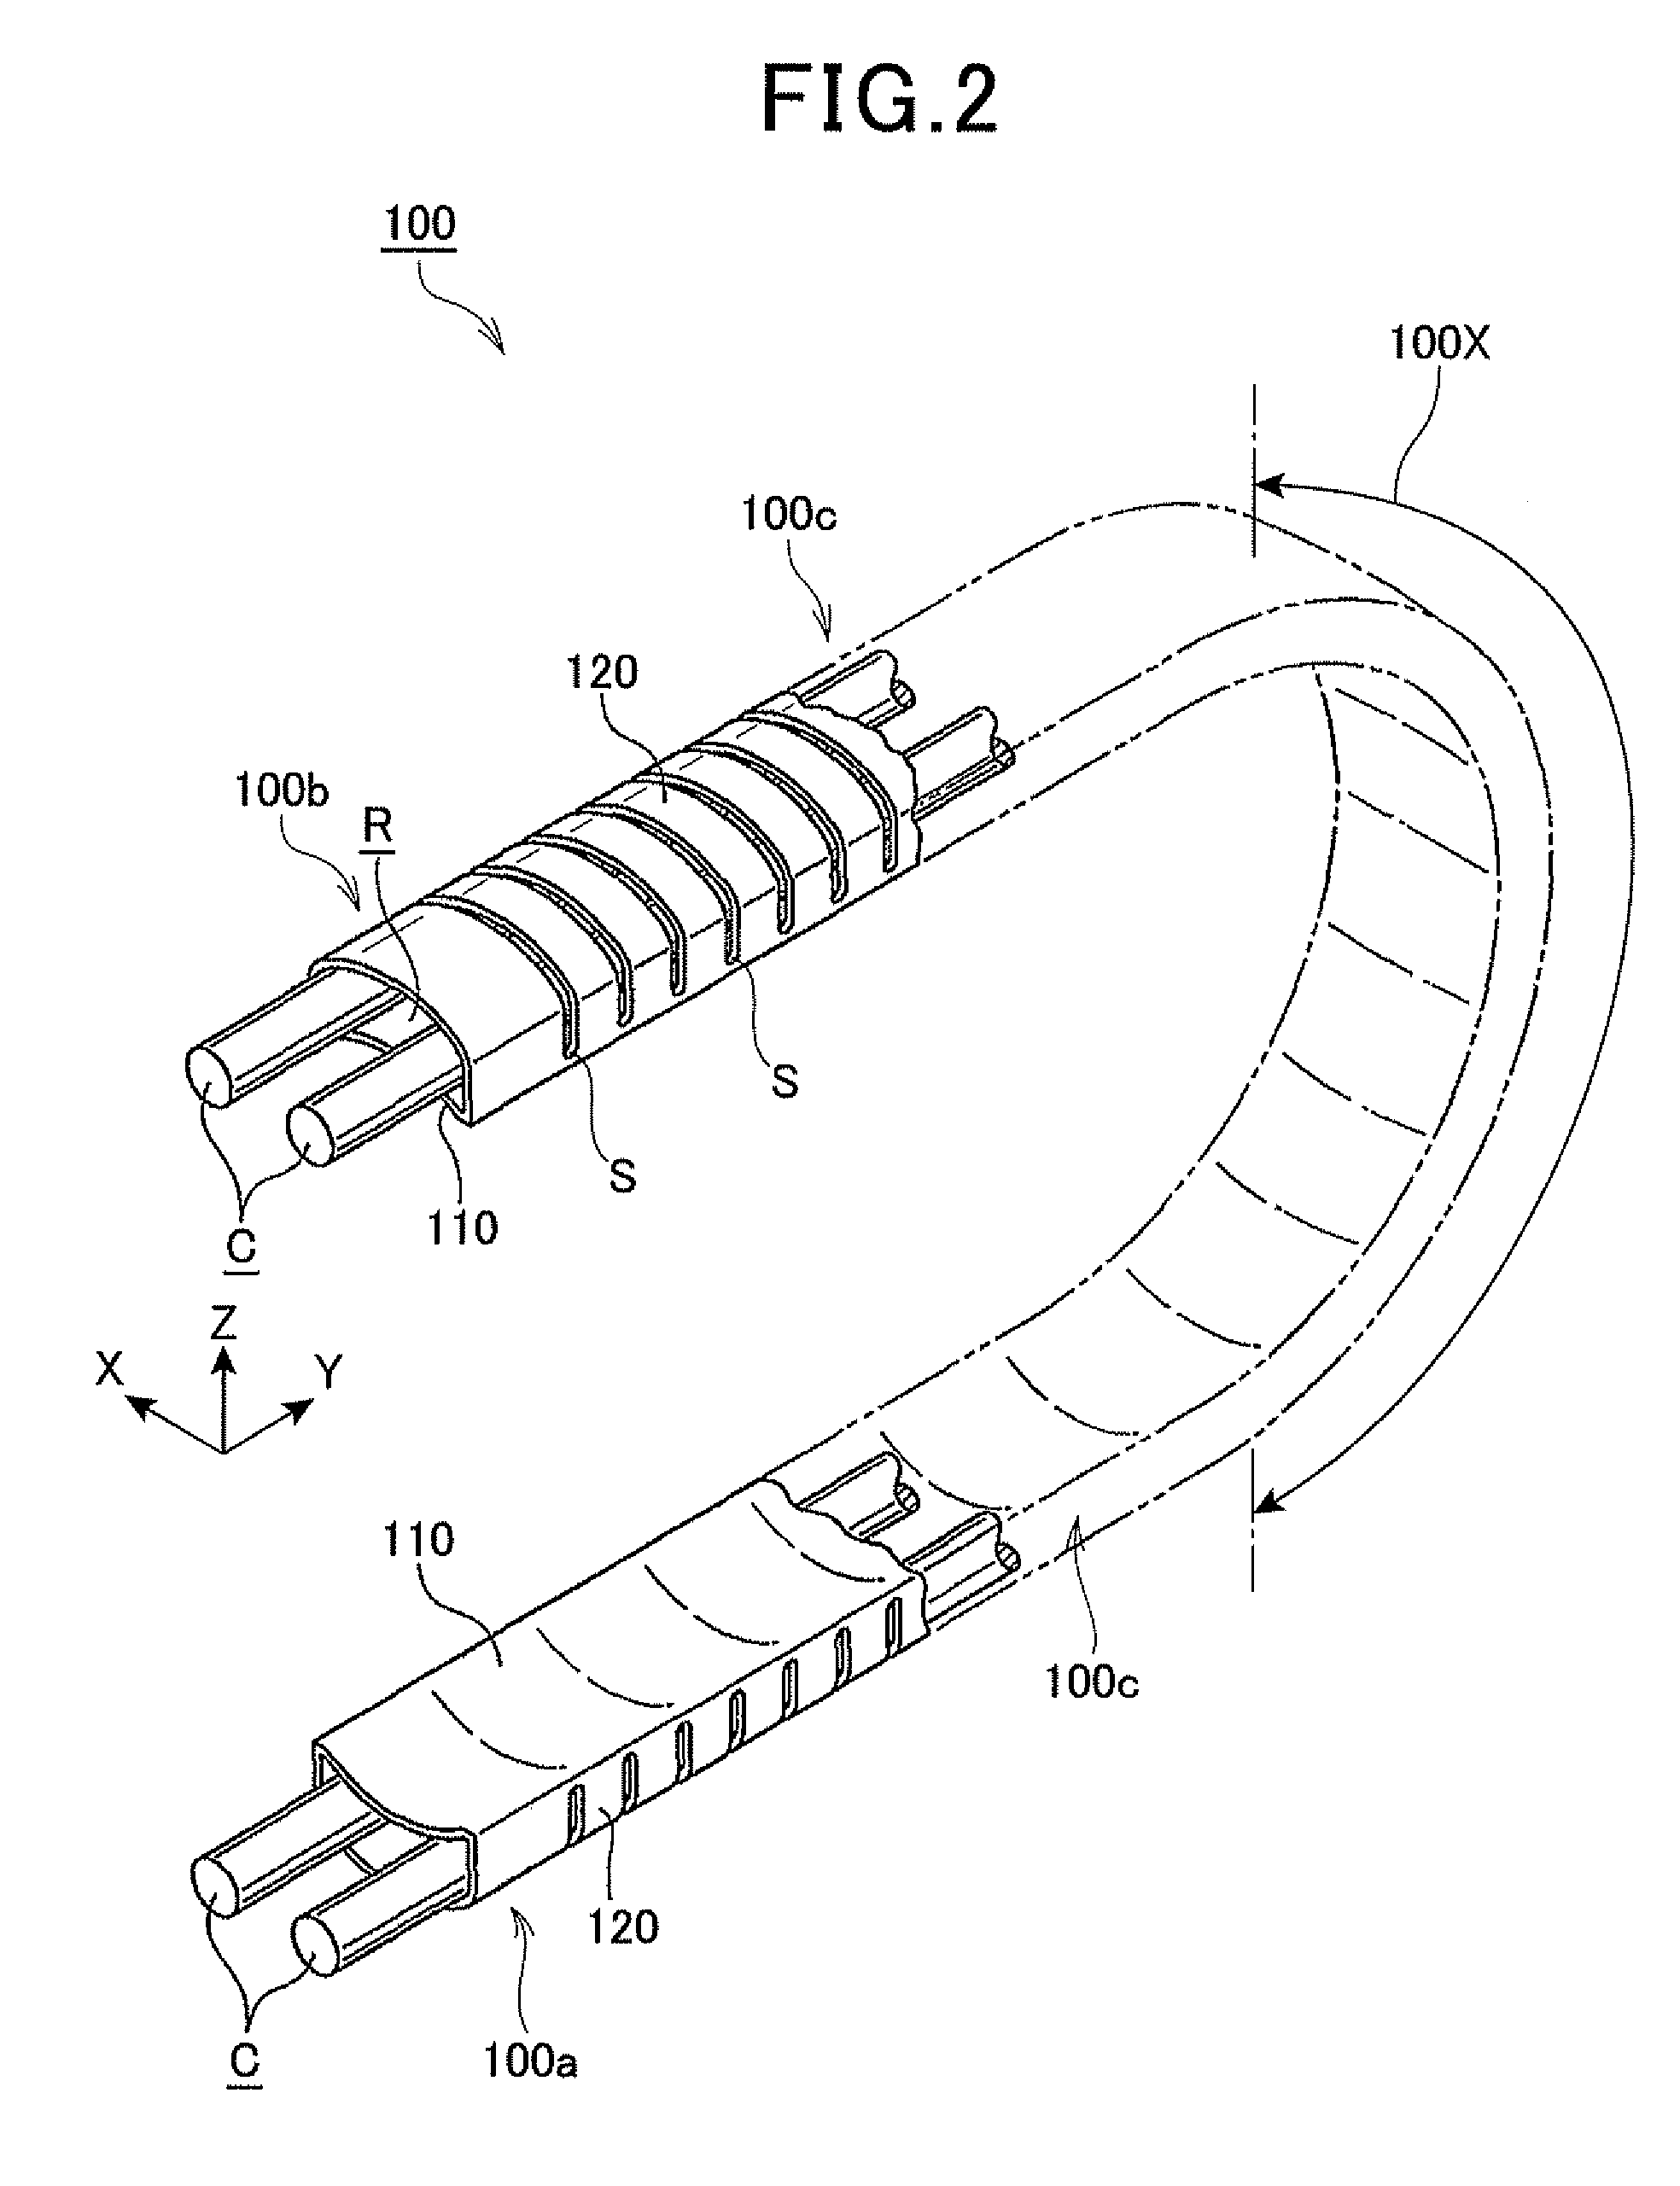 Flexible protective guide internally holding long members